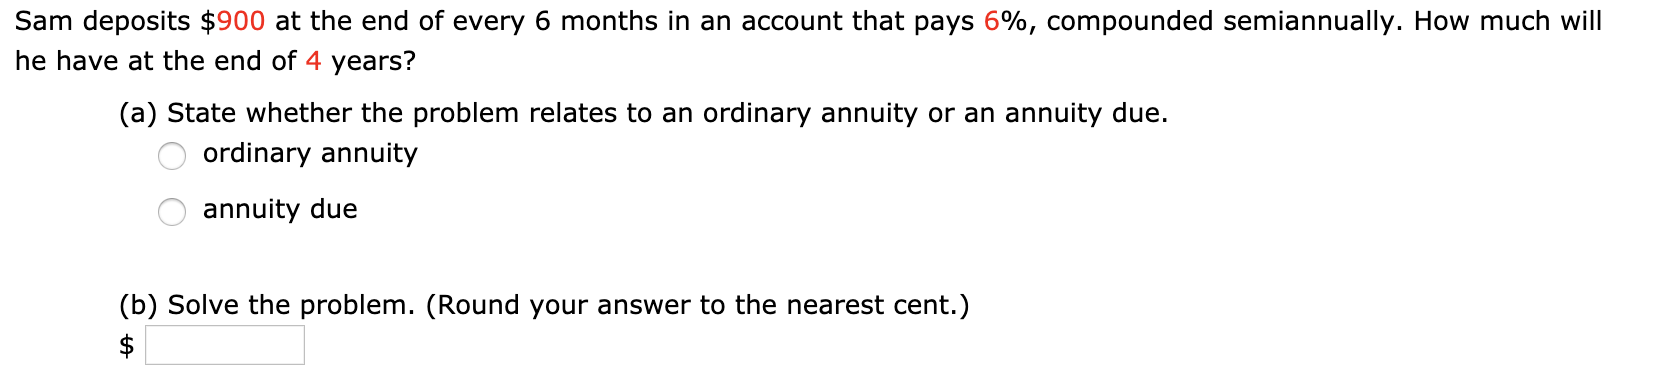 Sam deposits $900 at the end of every 6 months in an account that pays 6%, compounded semiannually. How much will
he have at the end of 4 years?
(a) State whether the problem relates to an ordinary annuity or an annuity due.
ordinary annuity
annuity due
(b) Solve the problem. (Round your answer to the nearest cent.)
